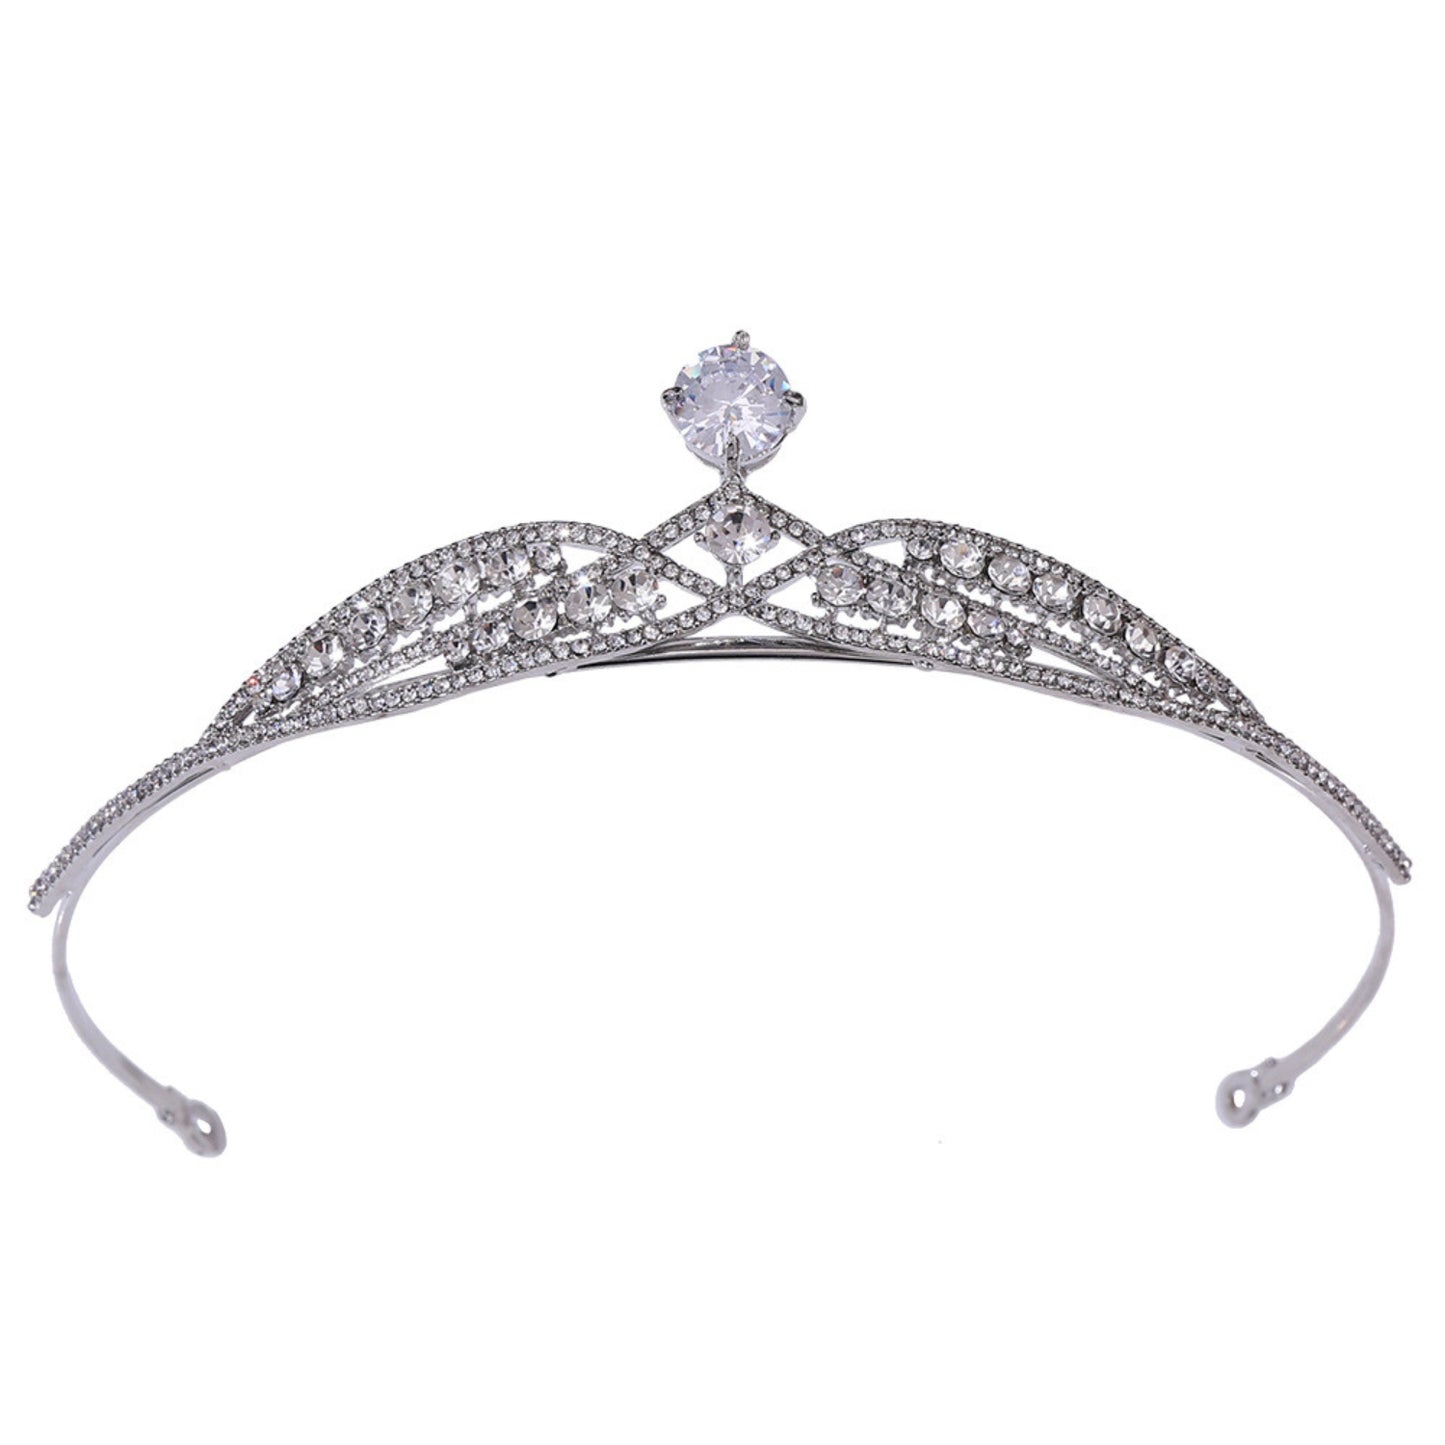 Silver Tiara Queen Crown for Women, Wedding Tiaras and Crowns, Metal Princess Tiara for Bride, Crystal Birthday Quinceanera Pageant Prom